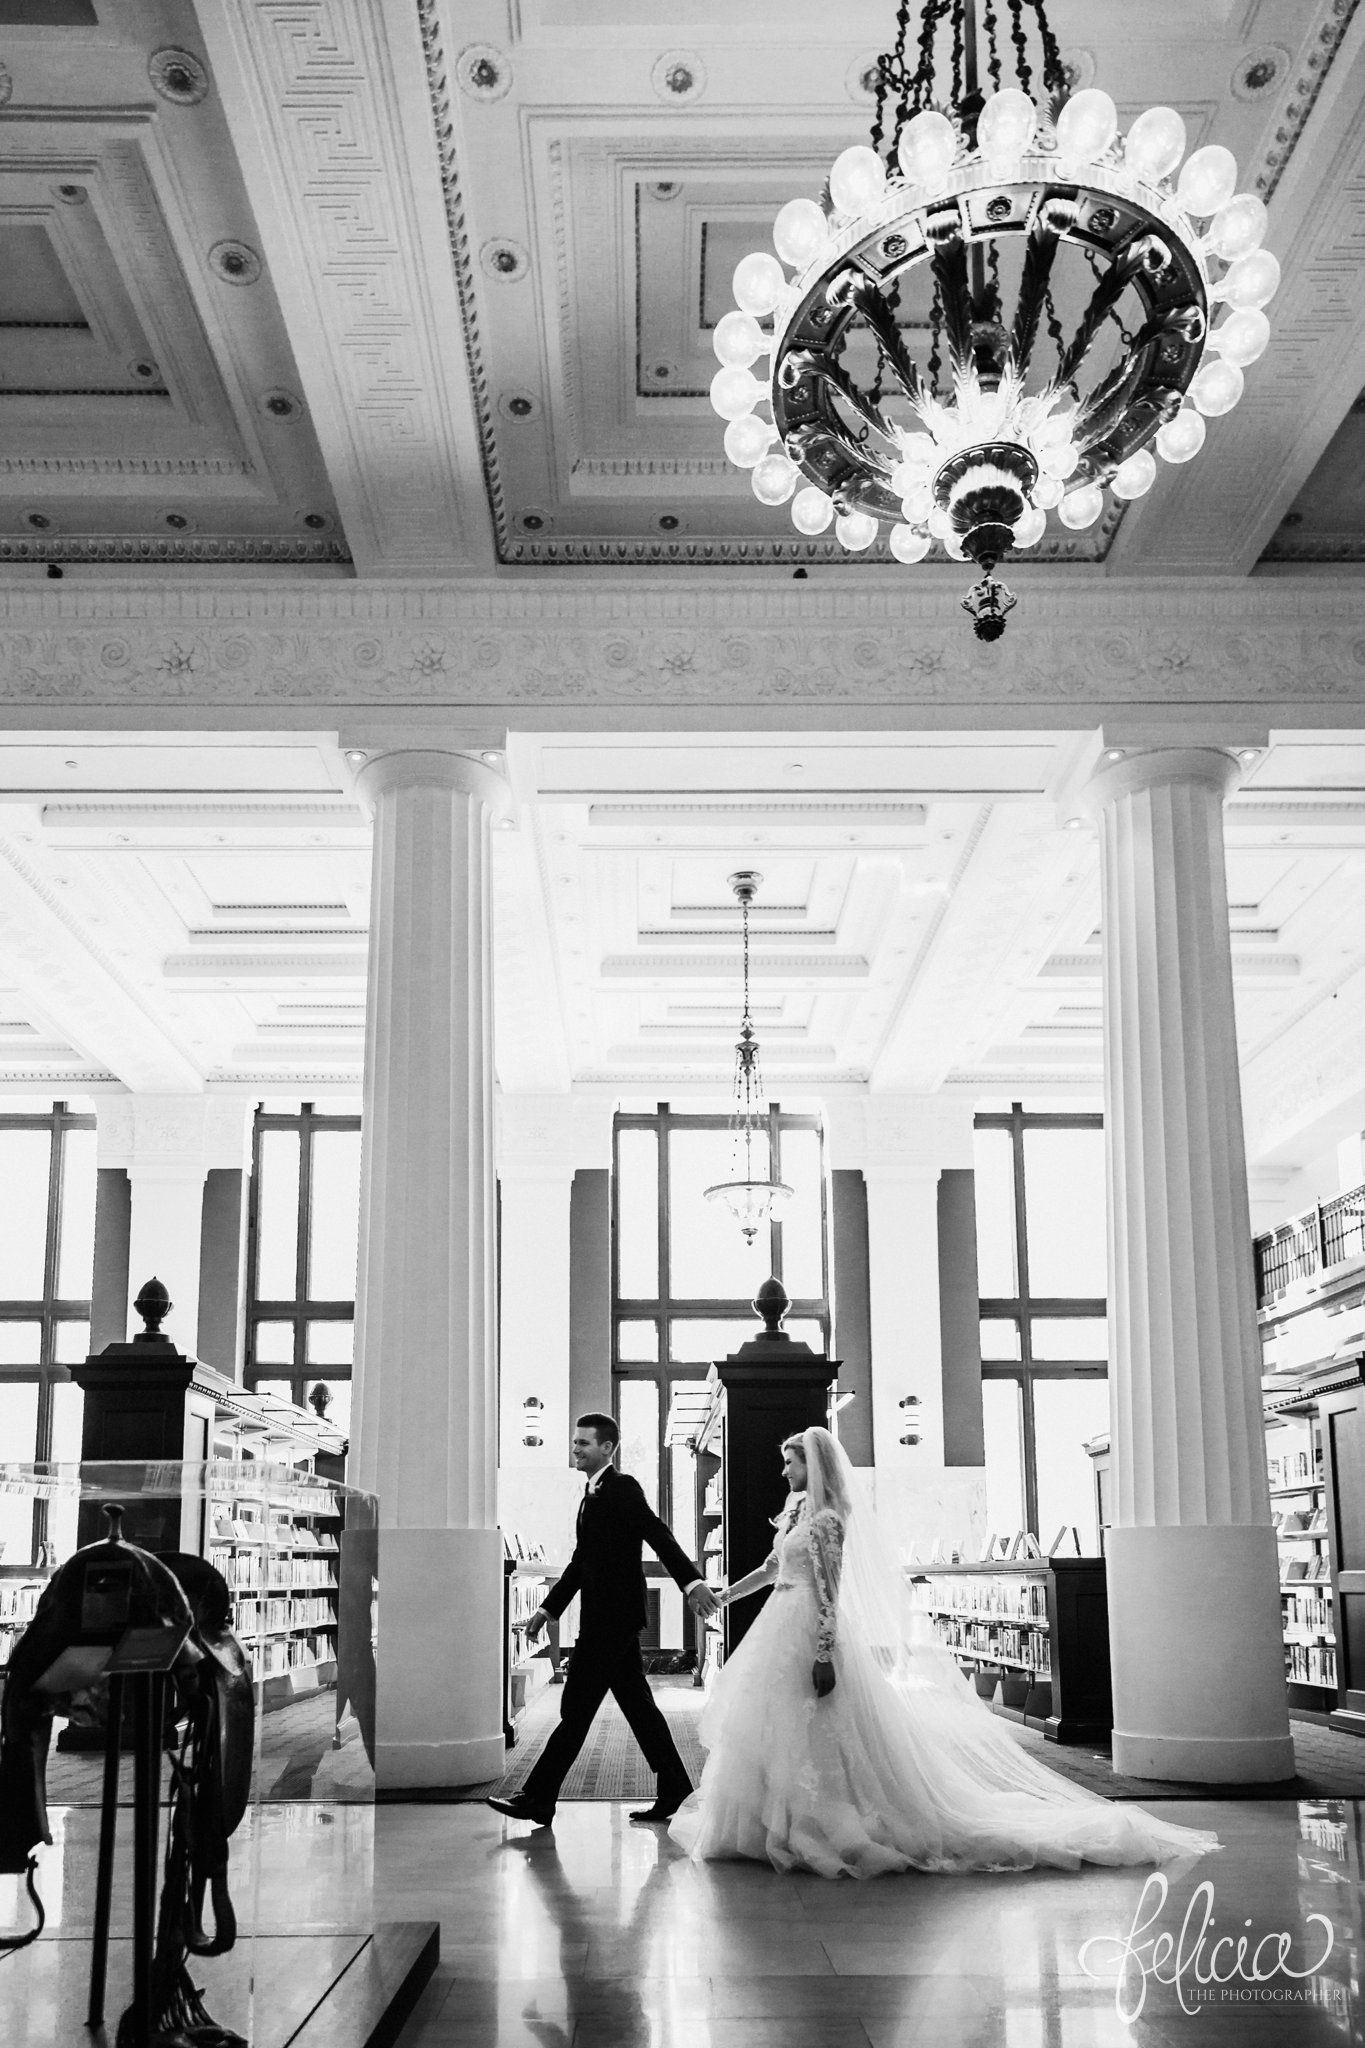 images by feliciathephotographer.com | wedding photographer | kansas city | redemptorist | classic | whimsical | library | holding hands | romantic | true love | lace dress | belle vogue | black and white | chandelier | 